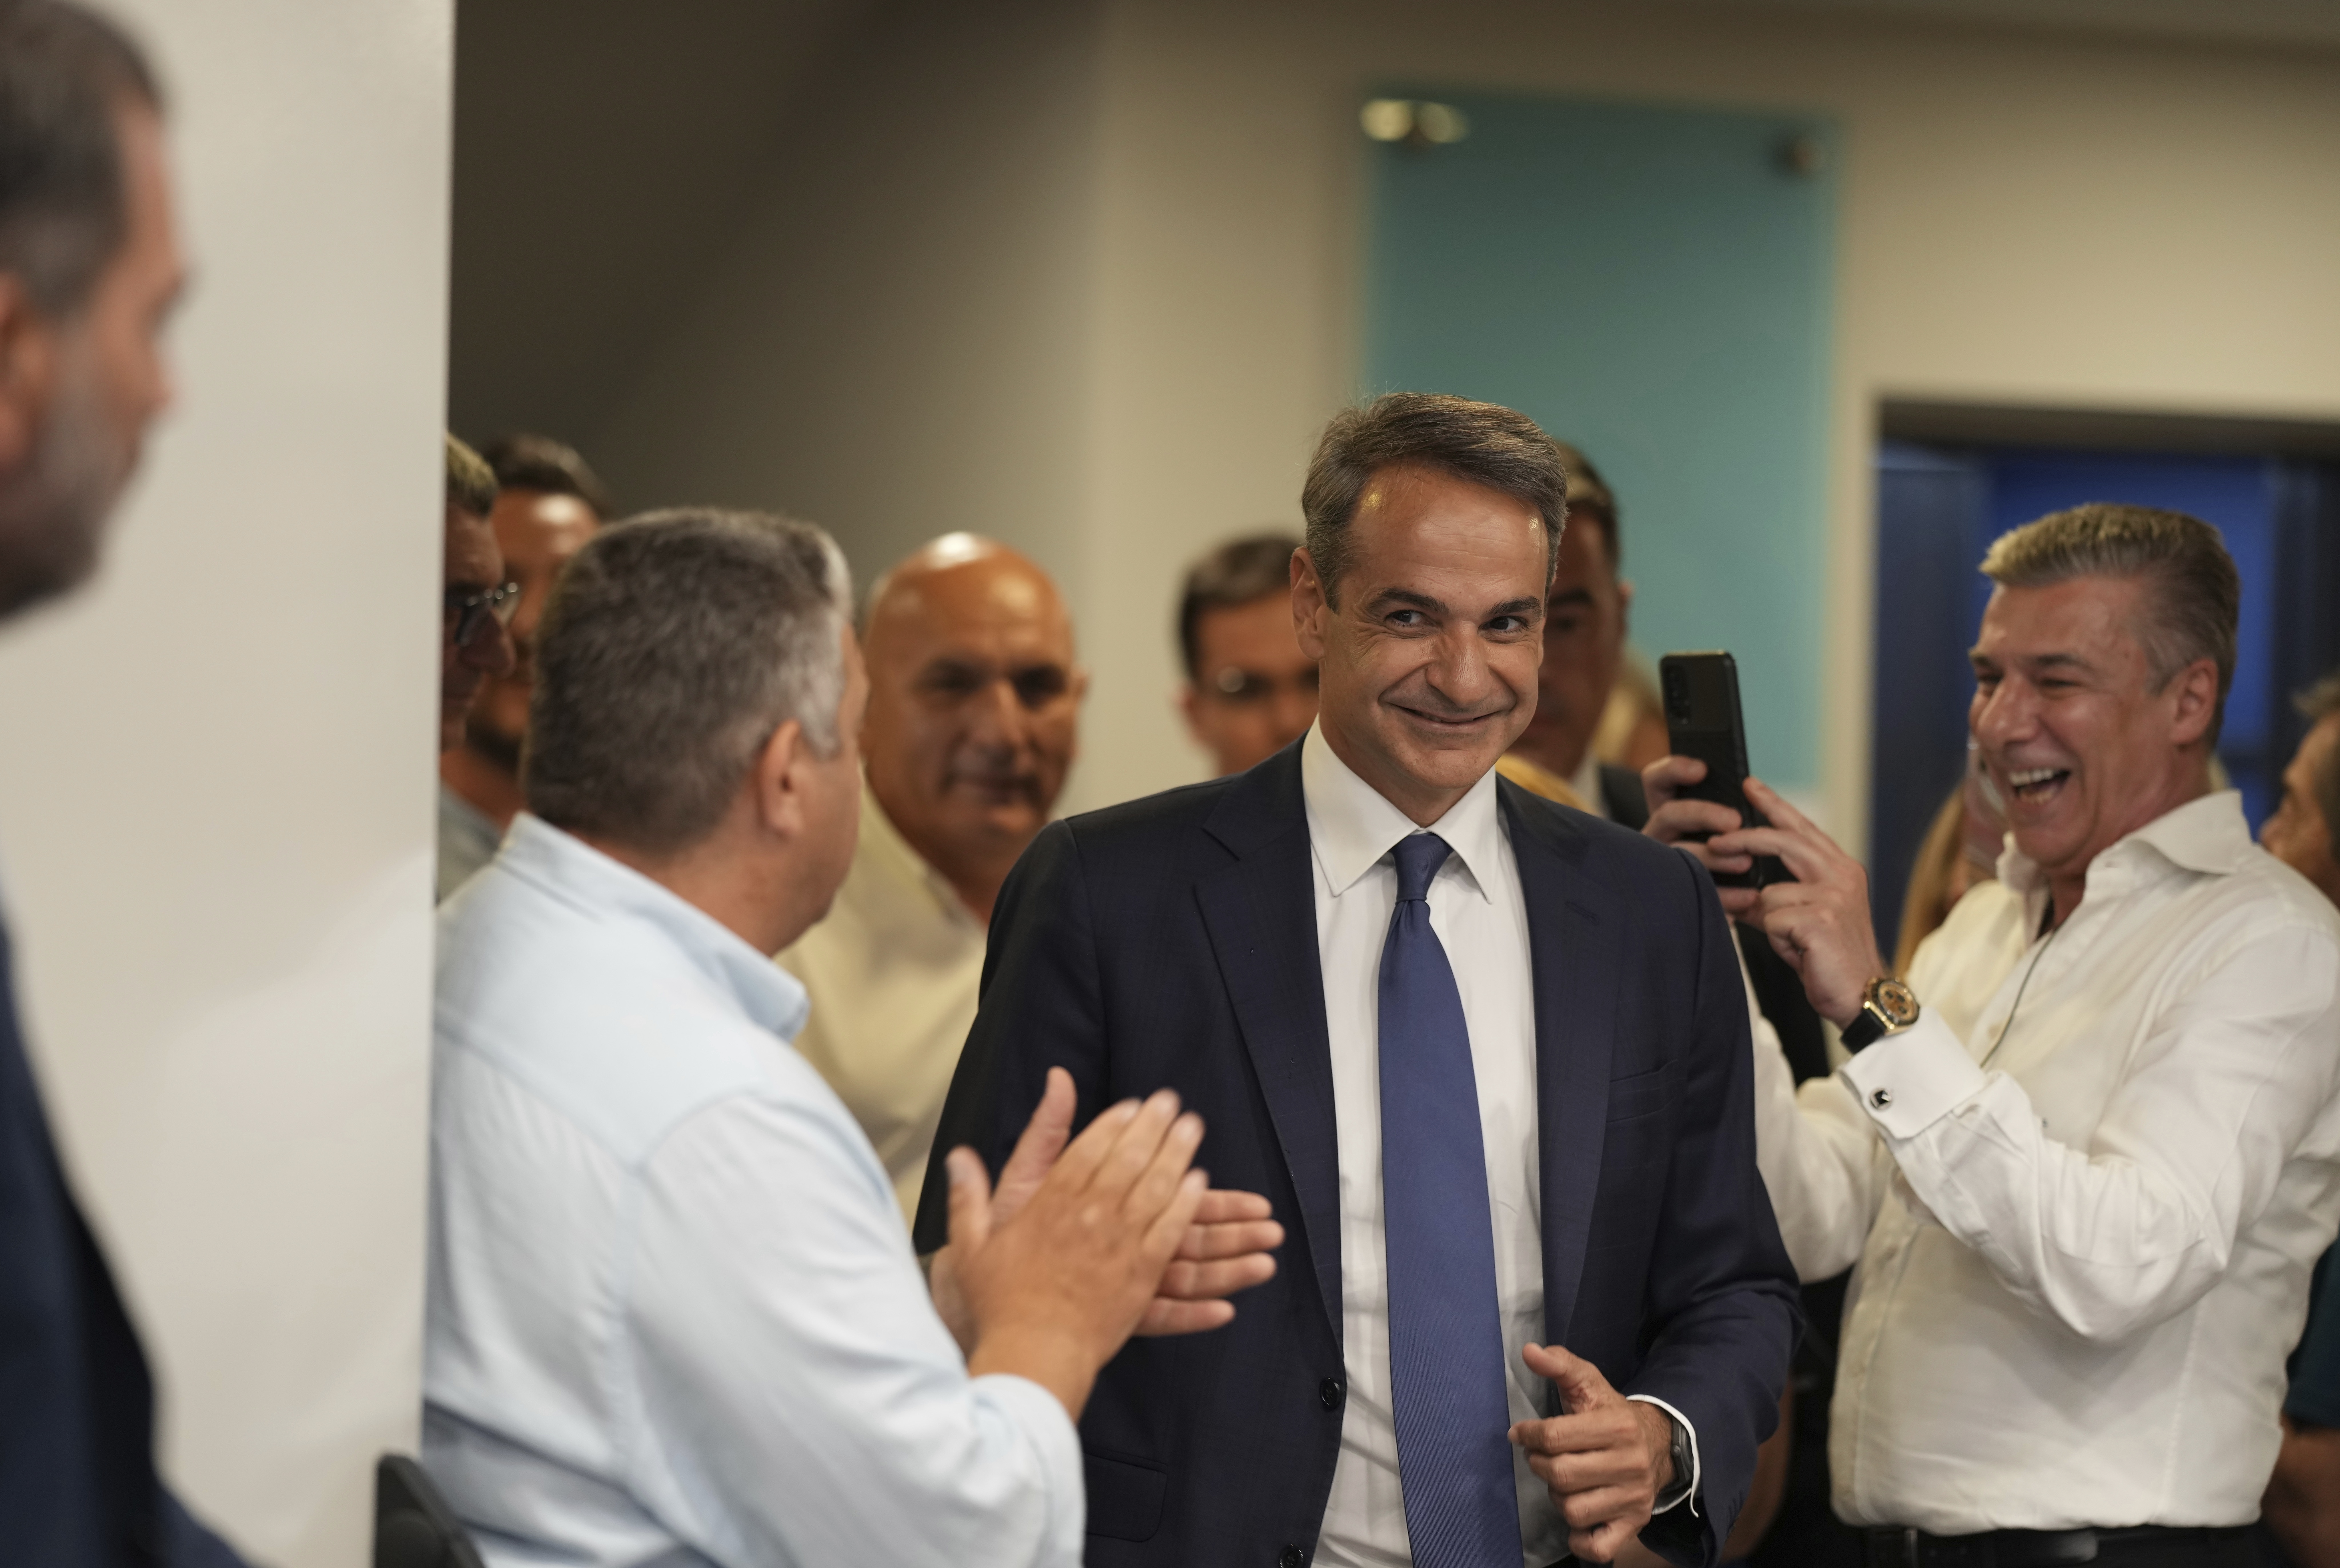 Kyriakos Mitsotakis leader of the center-right New Democracy arrives for statements at the headquarters of the party in Athens, Greece, Sunday, June 25, 2023. Greece's conservative New Democracy party has won a landslide victory in the country's second election in five weeks, with partial official results showing it gaining a comfortable parliamentary majority to form a government for a second four-year term. (AP Photo/Petros Giannakouris)

Associated Press/LaPresse
Only Italy and Spain